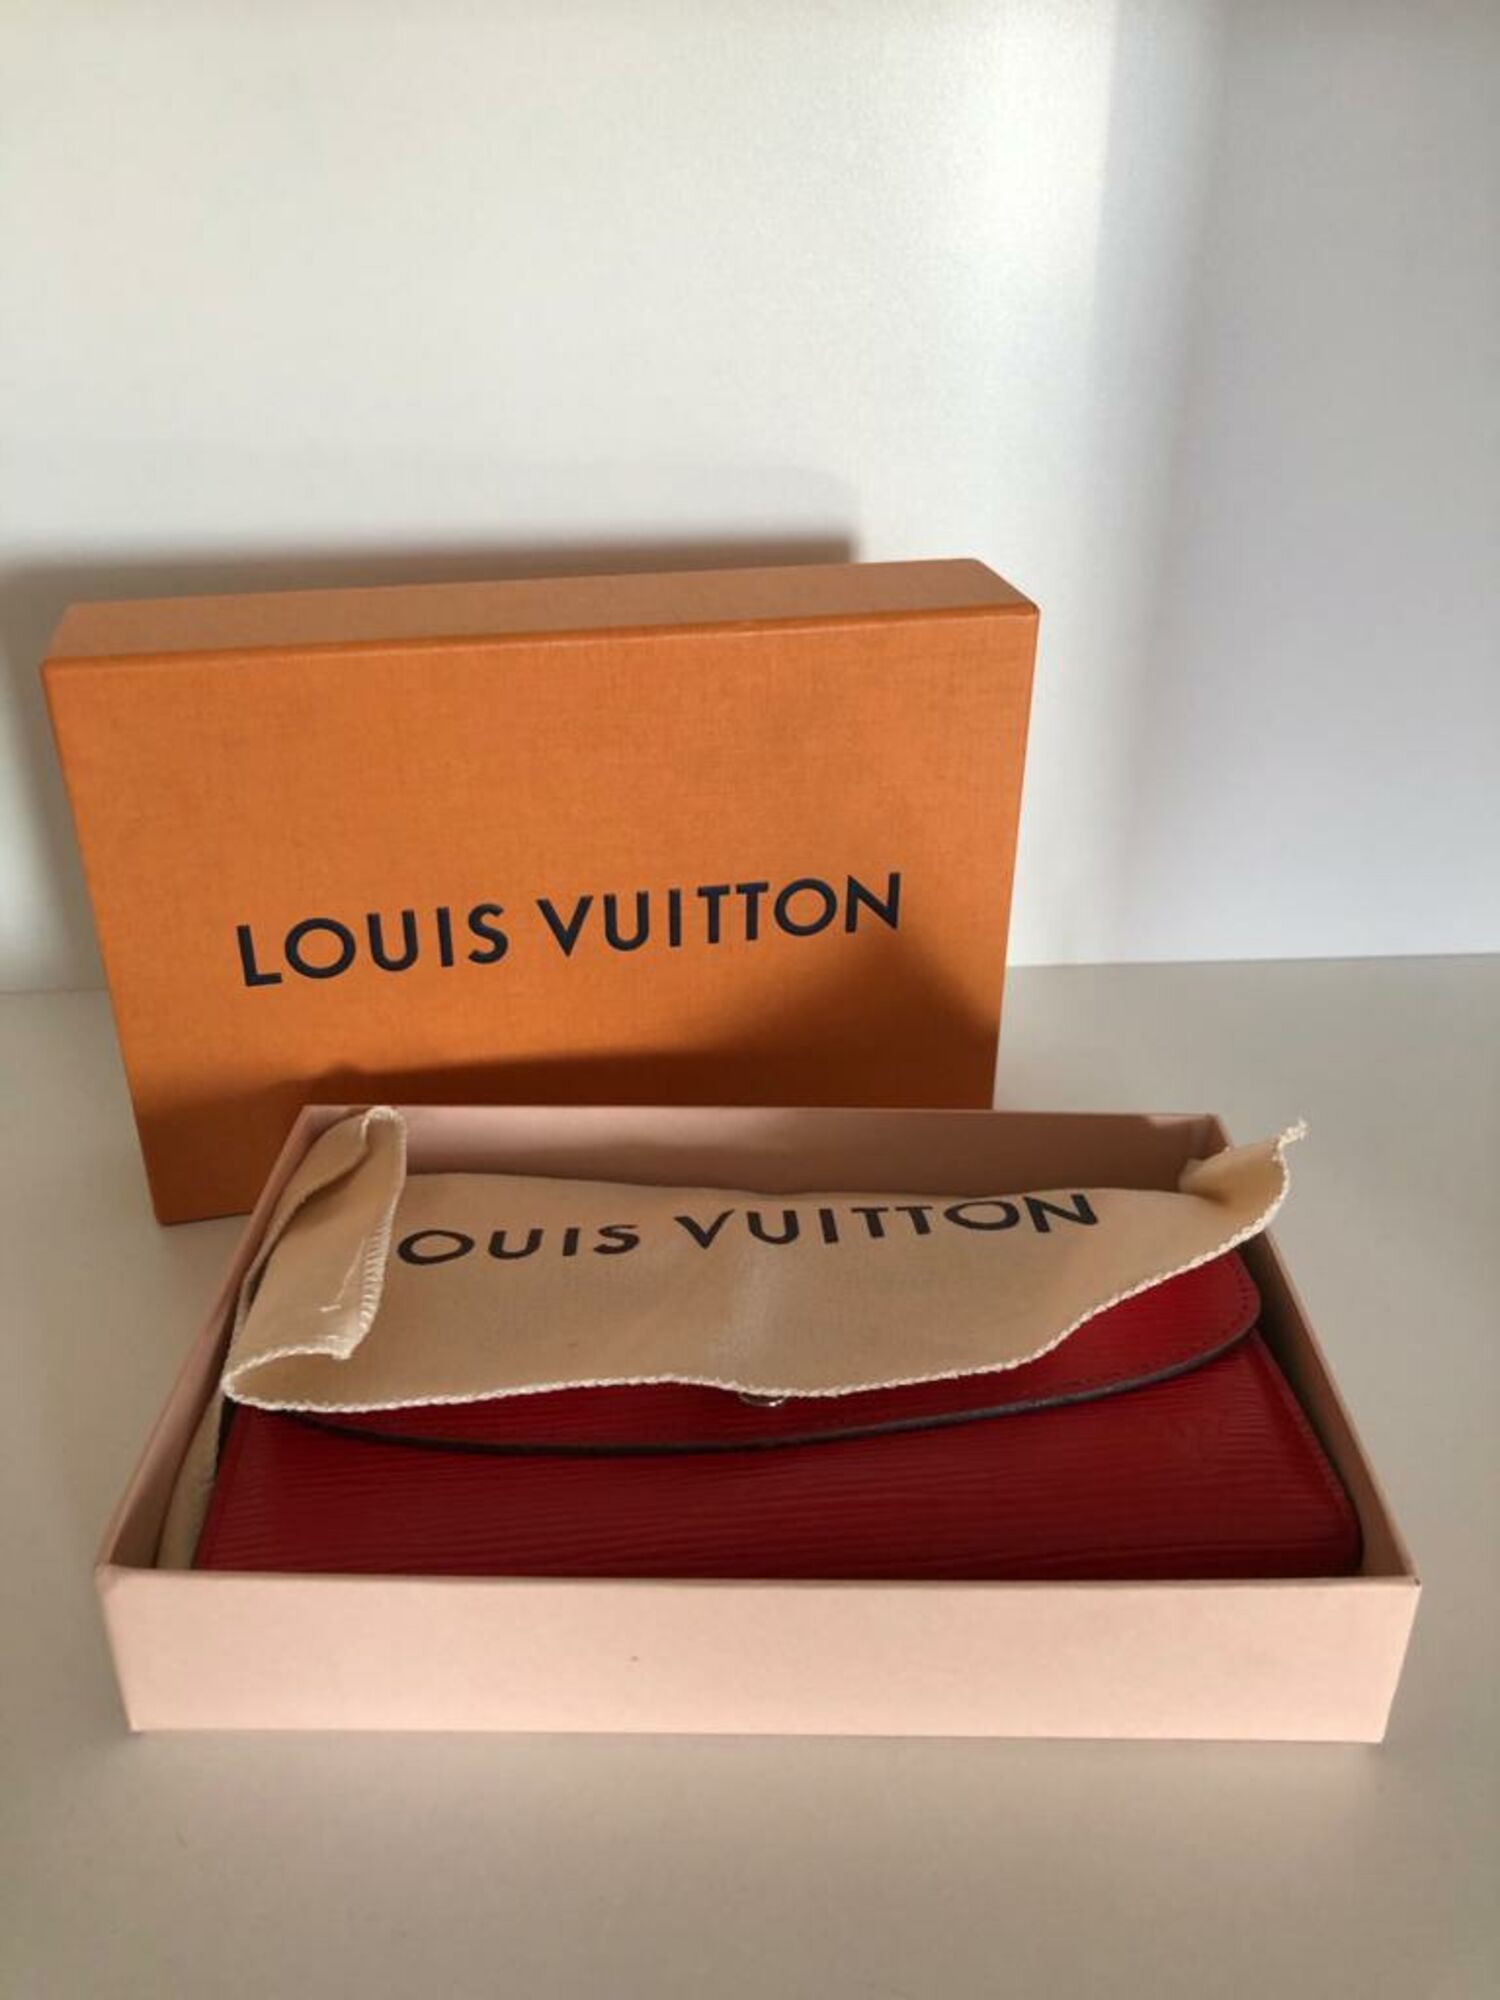 LOUIS VUITTON ELYSEE MONOGRAM WALLET with gold tone clasp at the front and  red partitioned leather interior with a central zippered pocket and twelve  card slot panels with dust bag box and